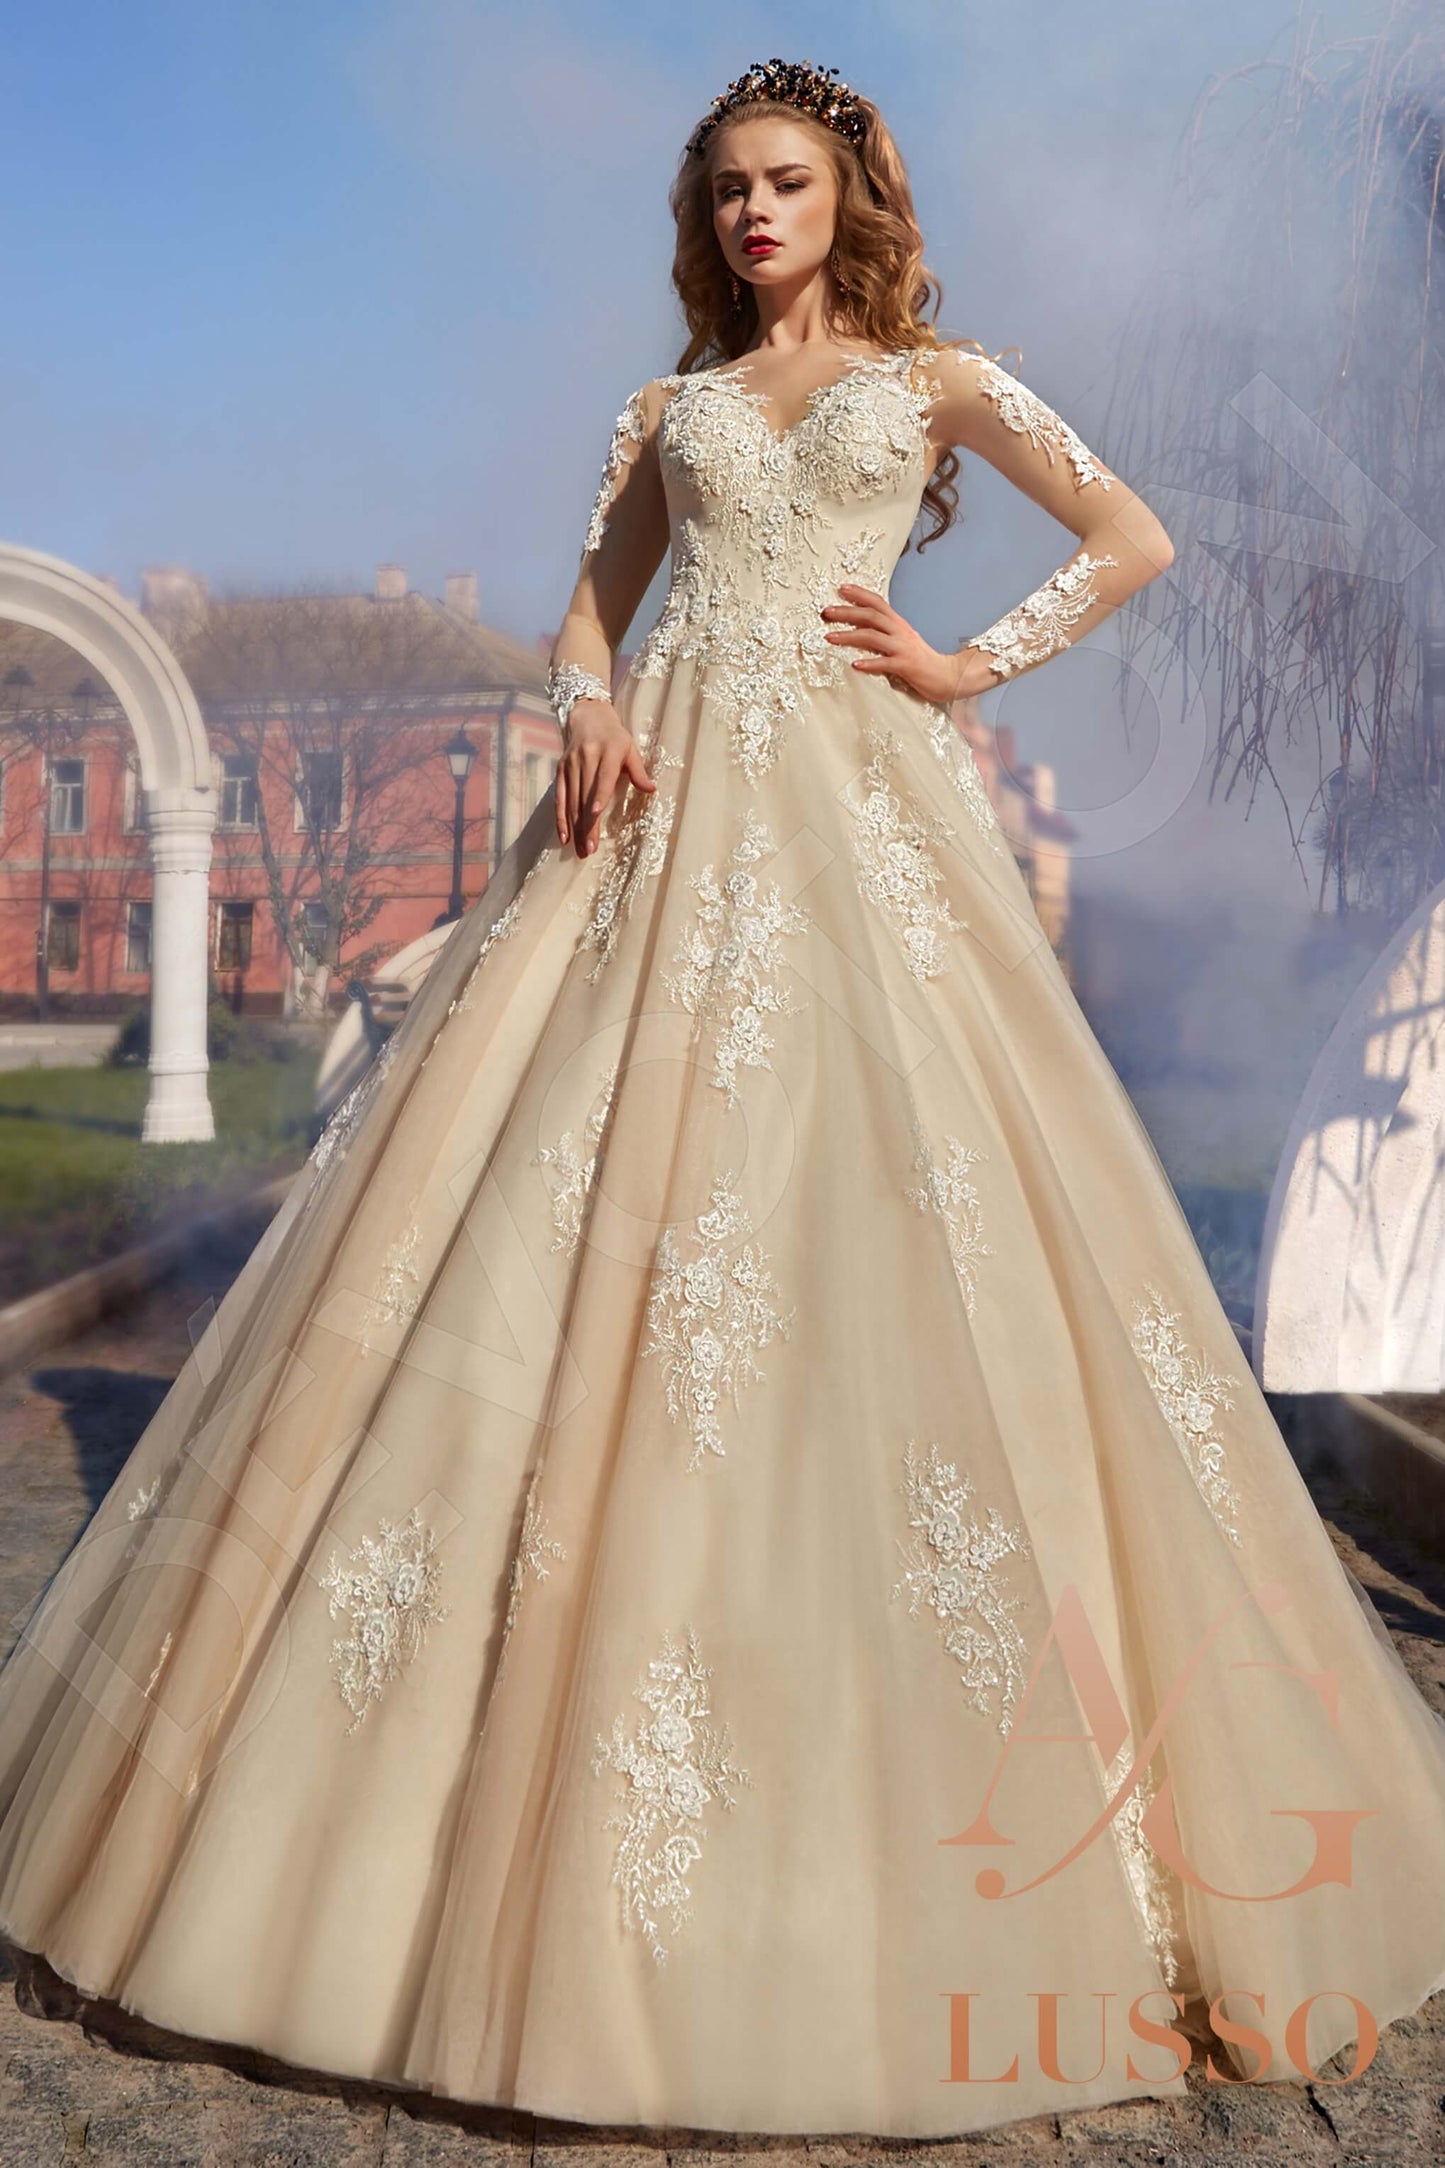 Imelly Illusion back Princess/Ball Gown Long sleeve Wedding Dress Front